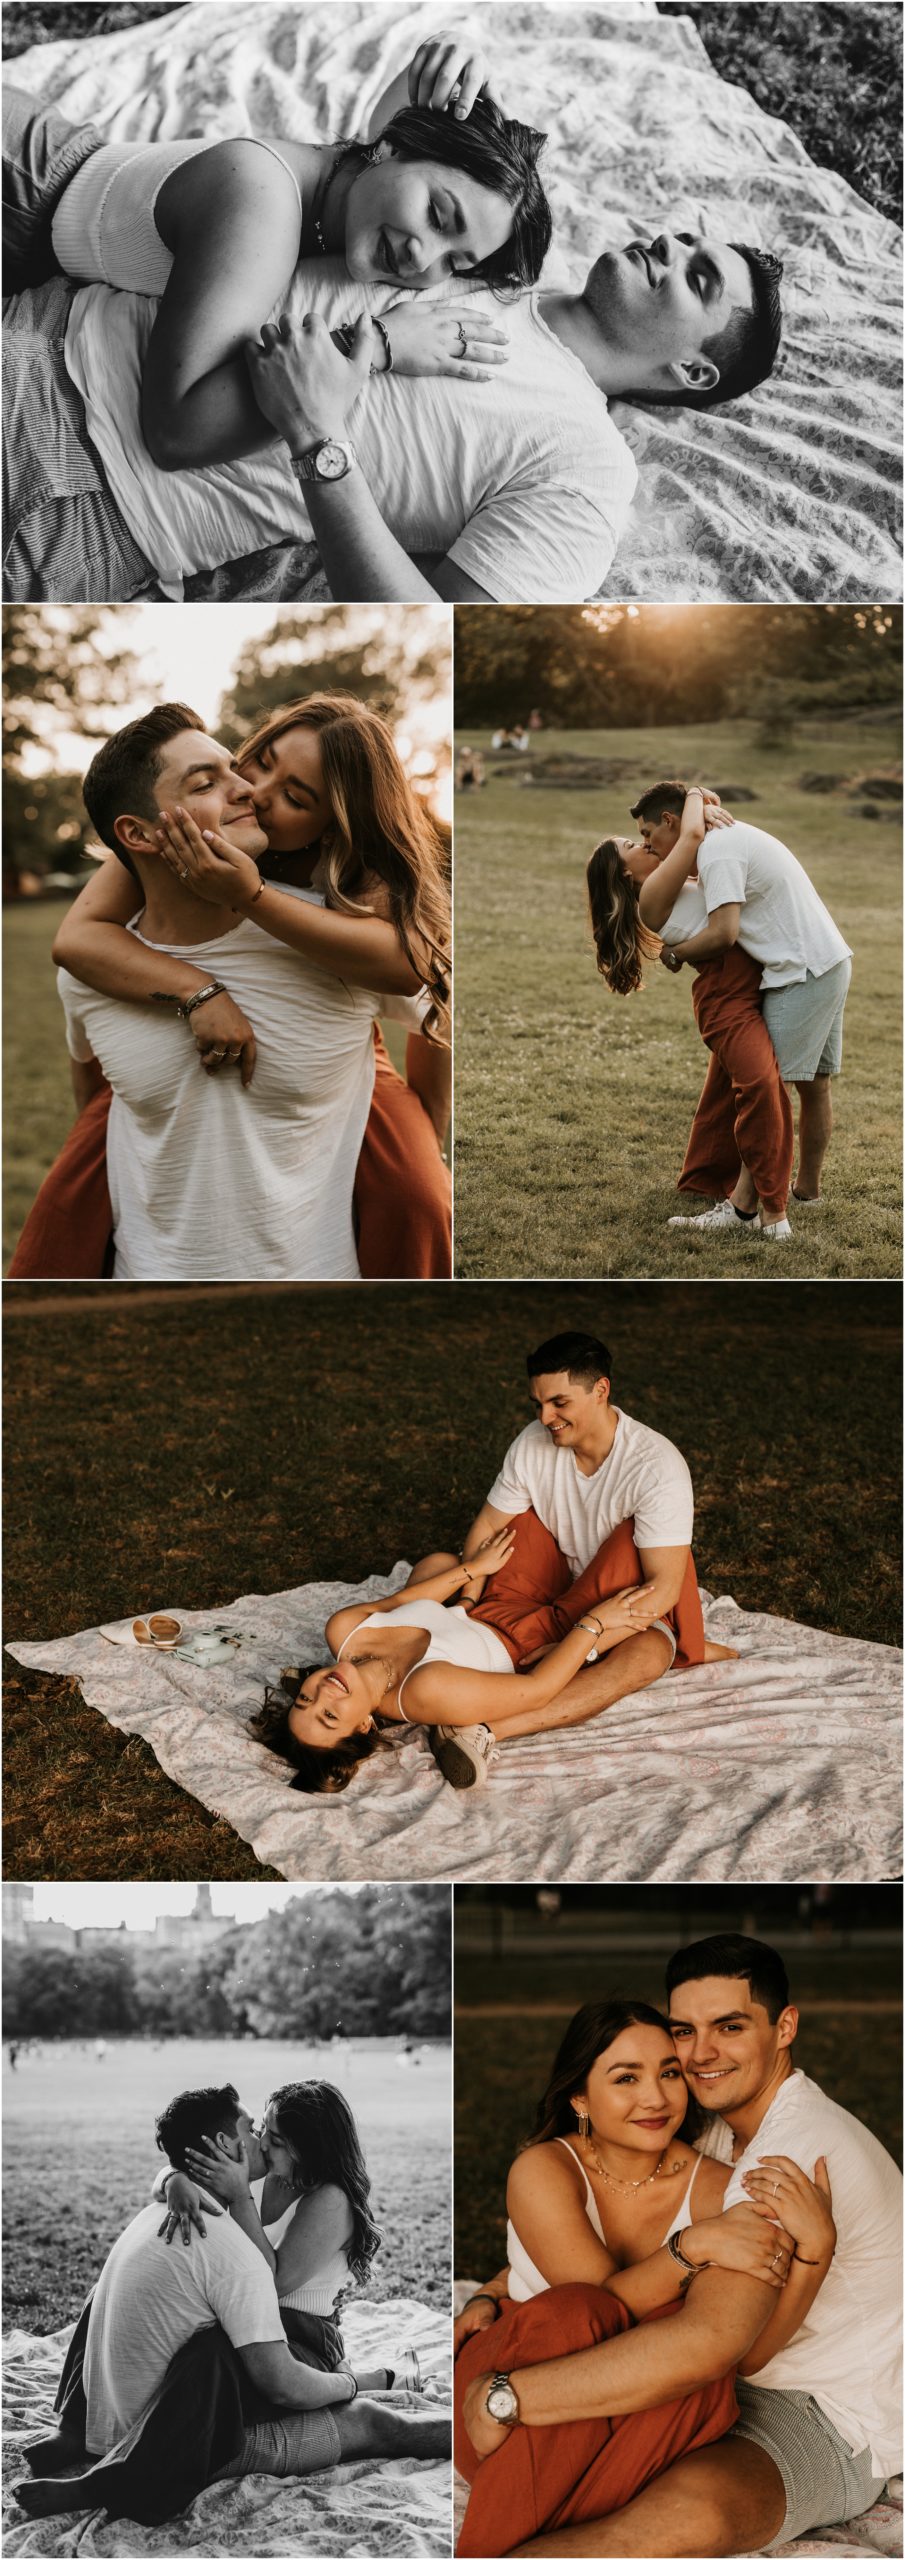 Summer Central Park NYC Engagement Session